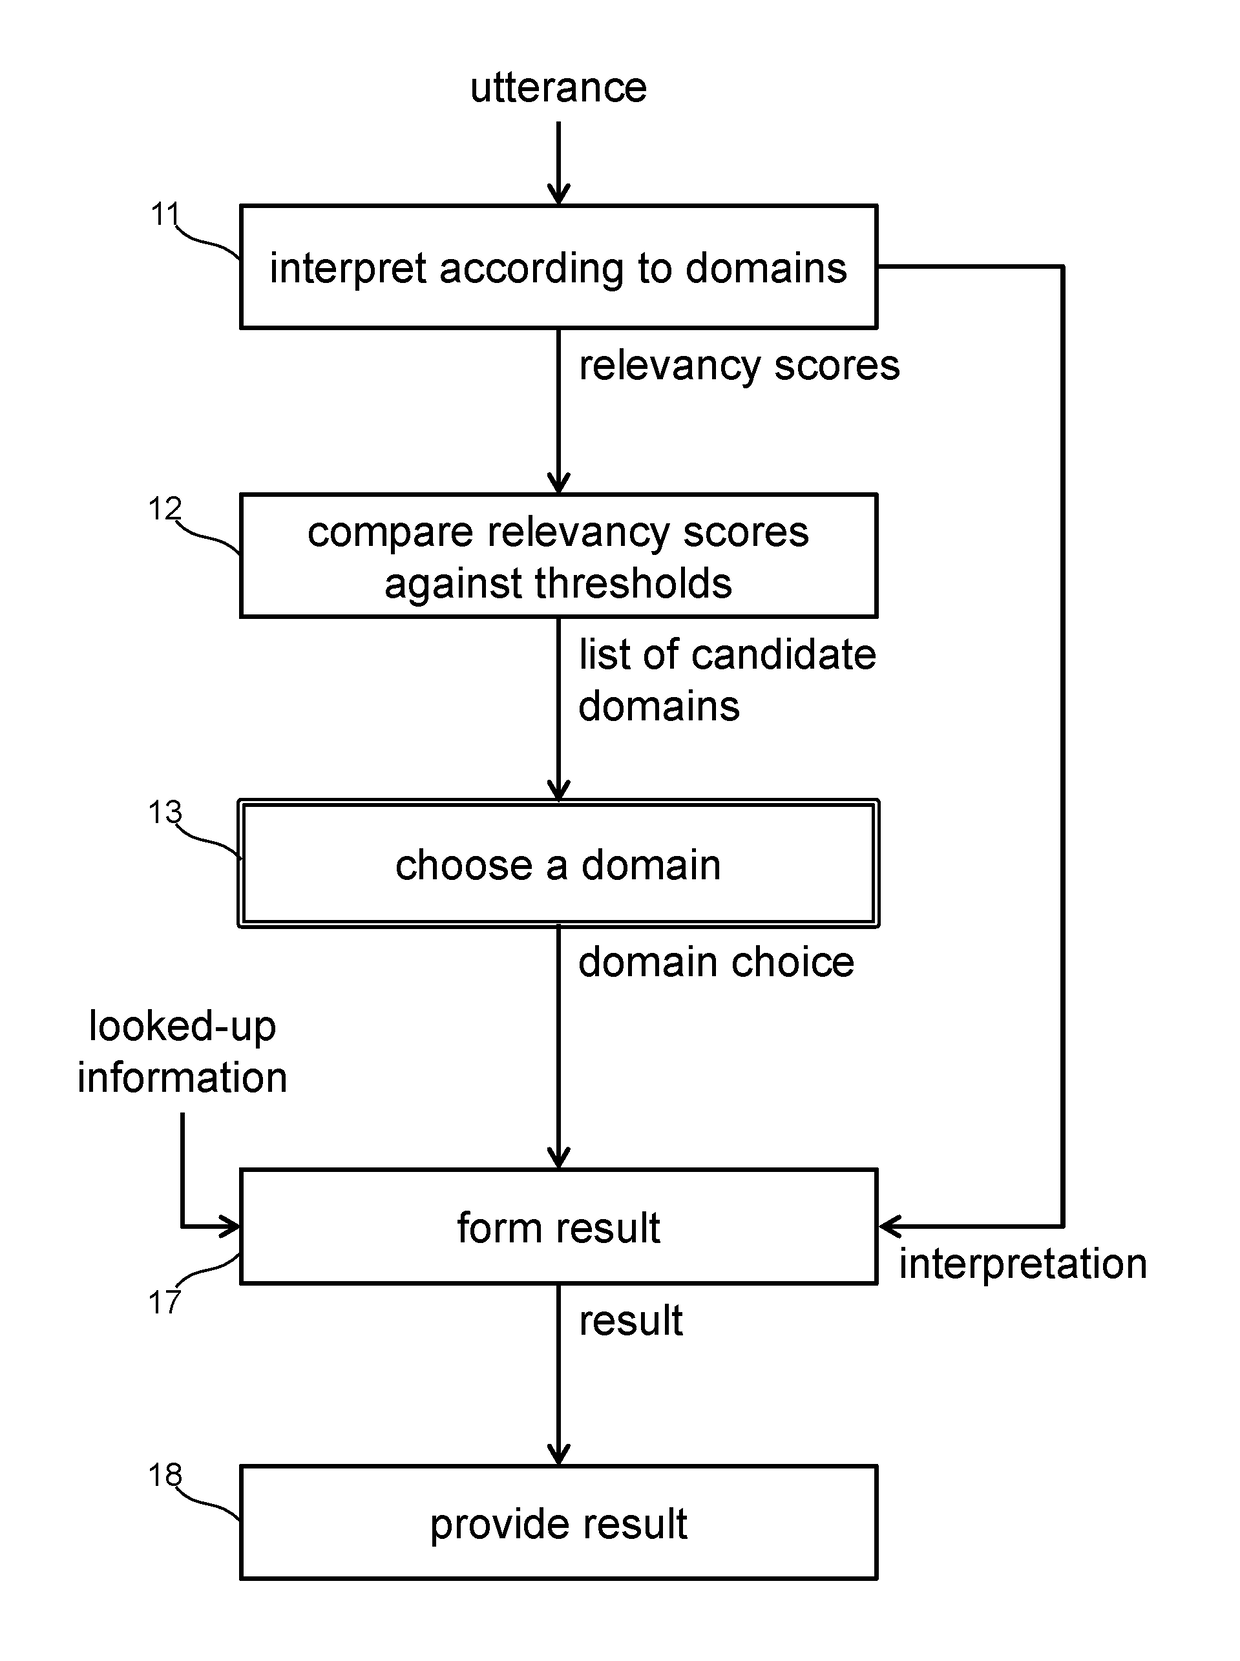 Speech-enabled system with domain disambiguation